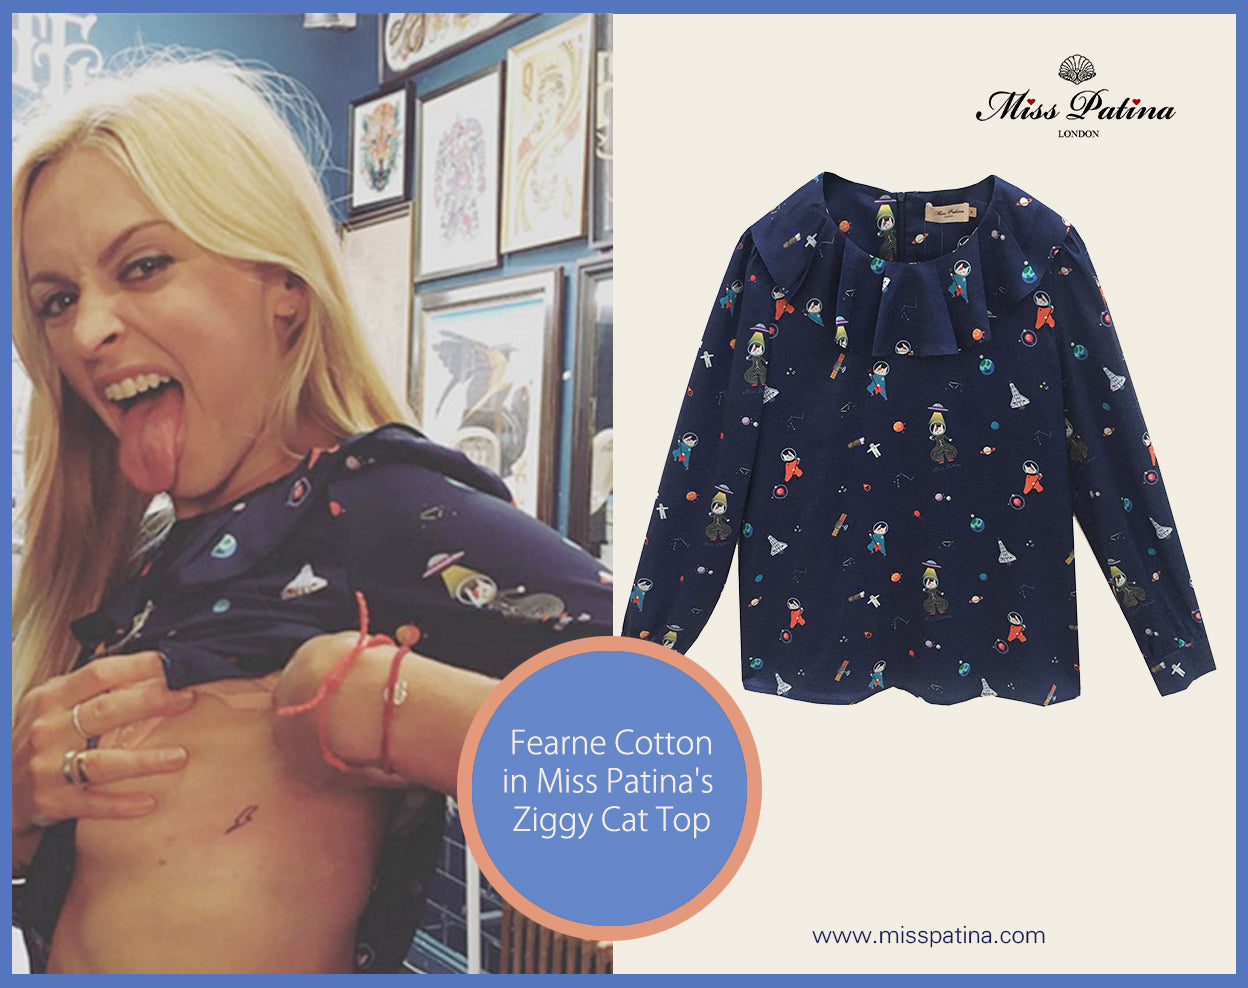 Spotted! Fearne Cotton in Miss Patina！